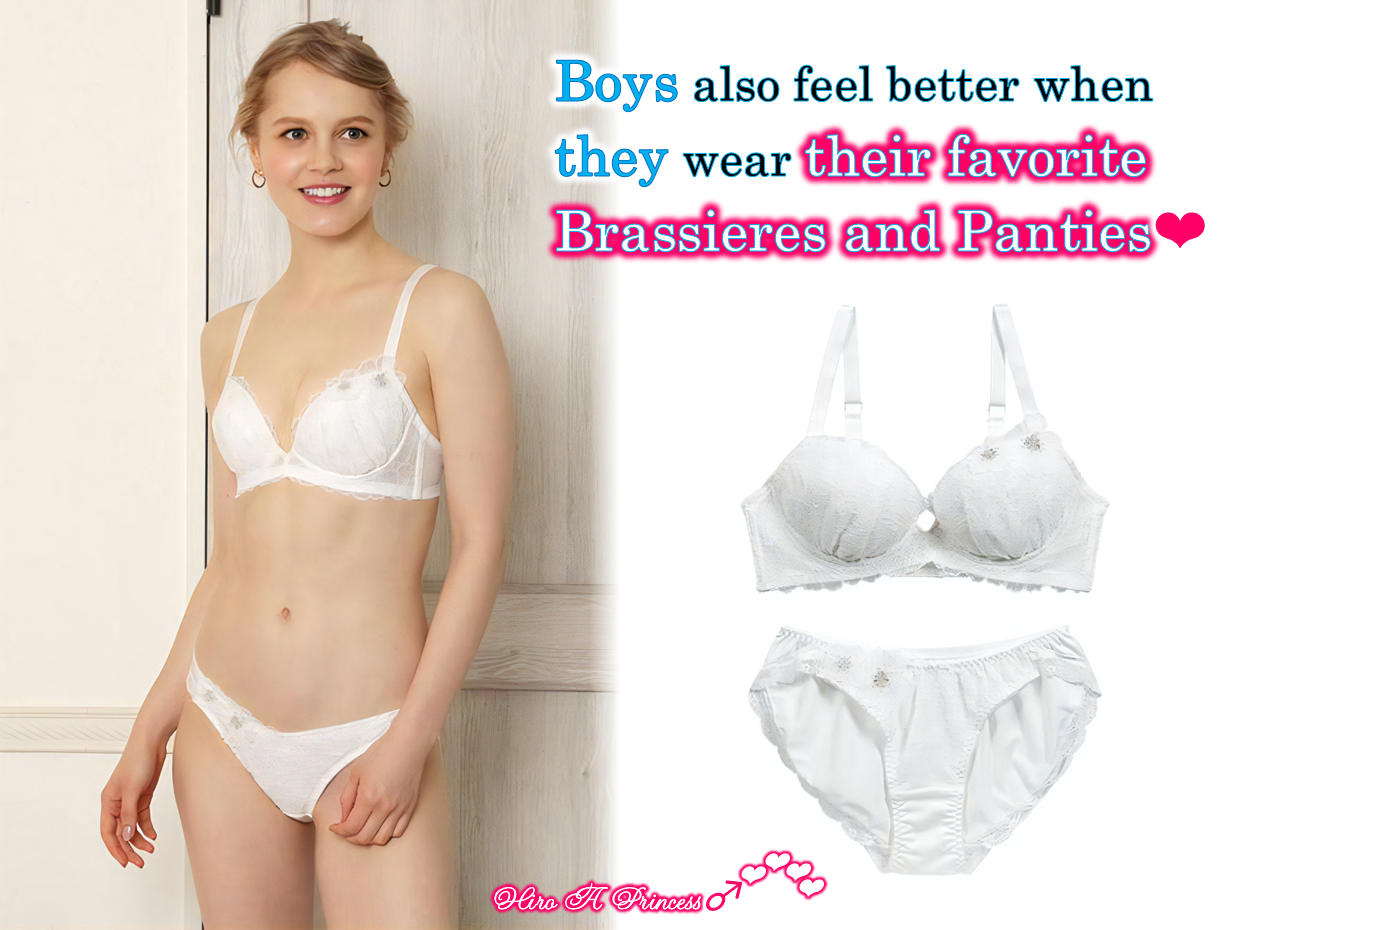 Boys also feel better when they wear their favorite Brassieres and Panties E